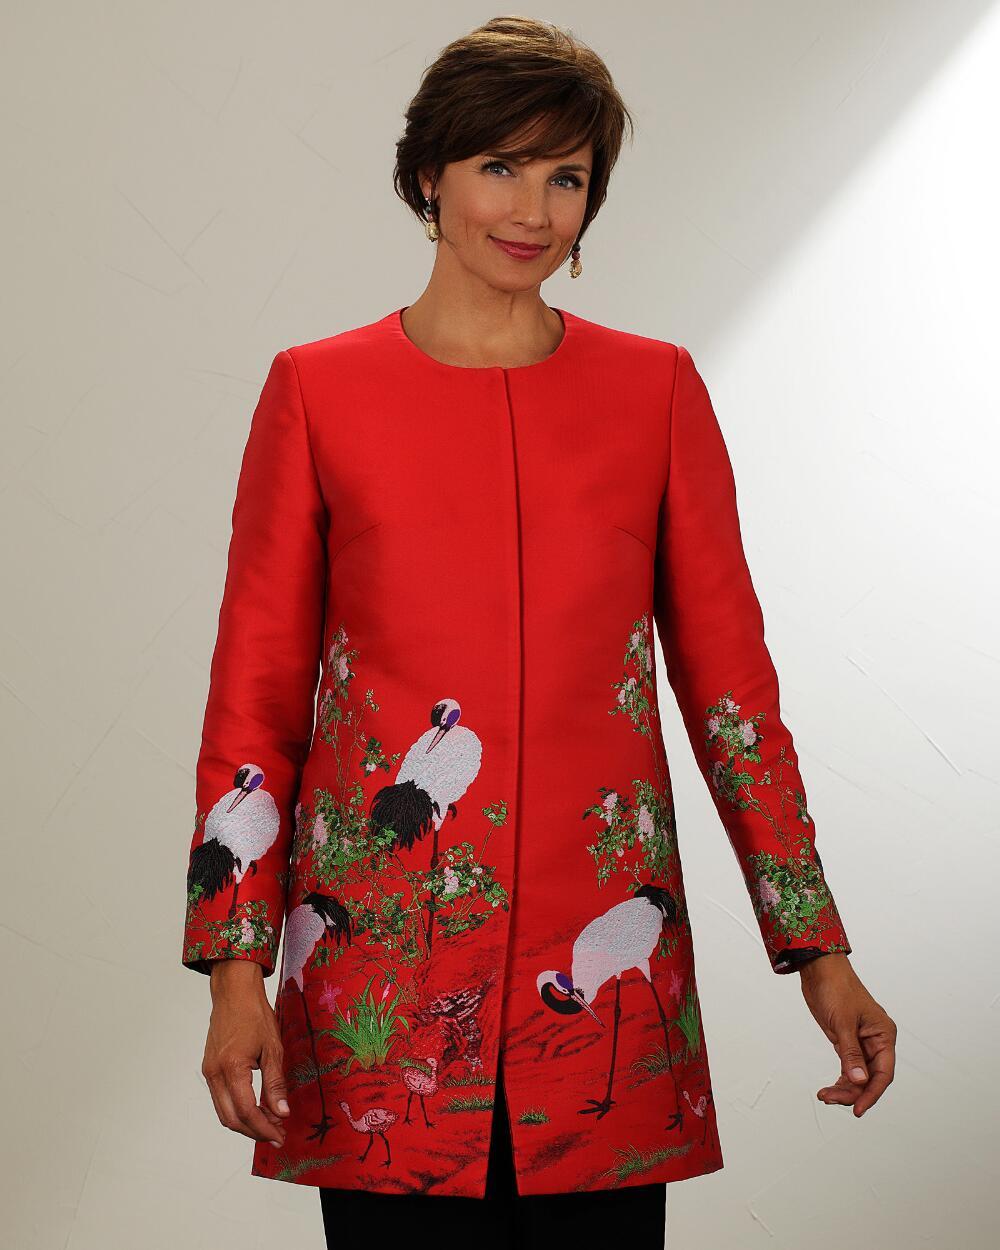 Primary image for Smithsonian Red Crane Jacquard Coat Embroidered